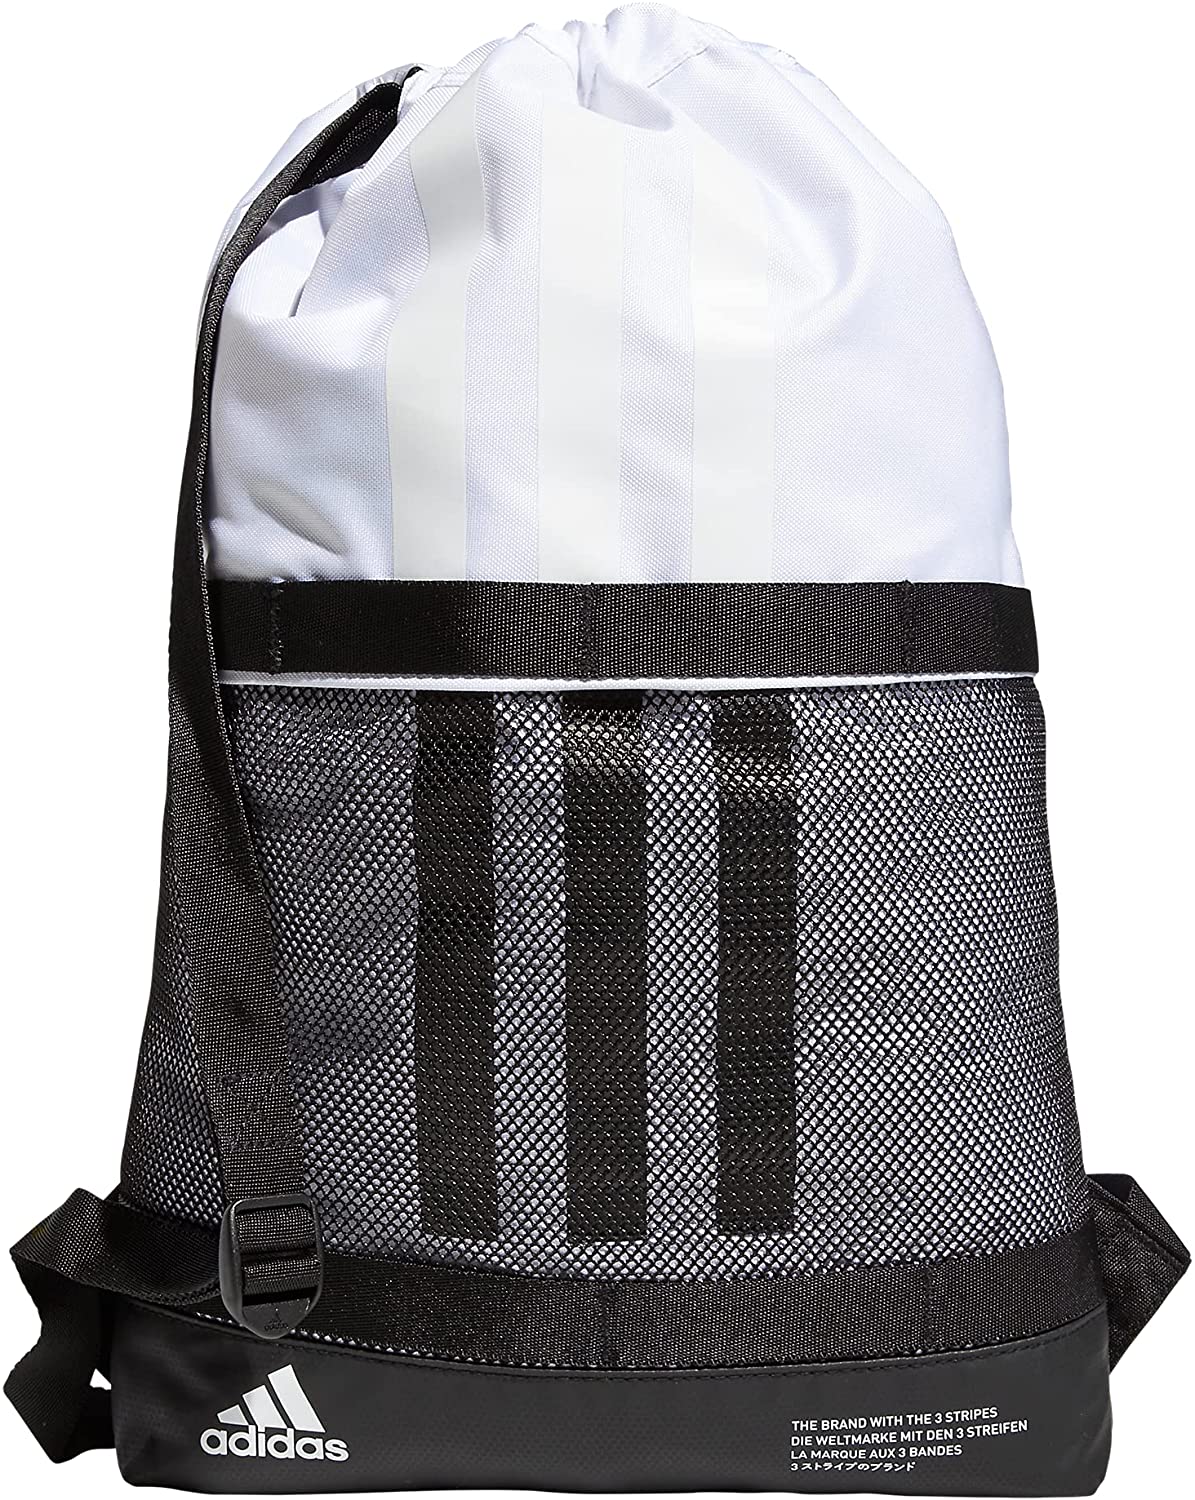 adidas Amplifier II Blocked Sackpack (Black, White) $12 + Free Shipping w/ Prime or on $25+